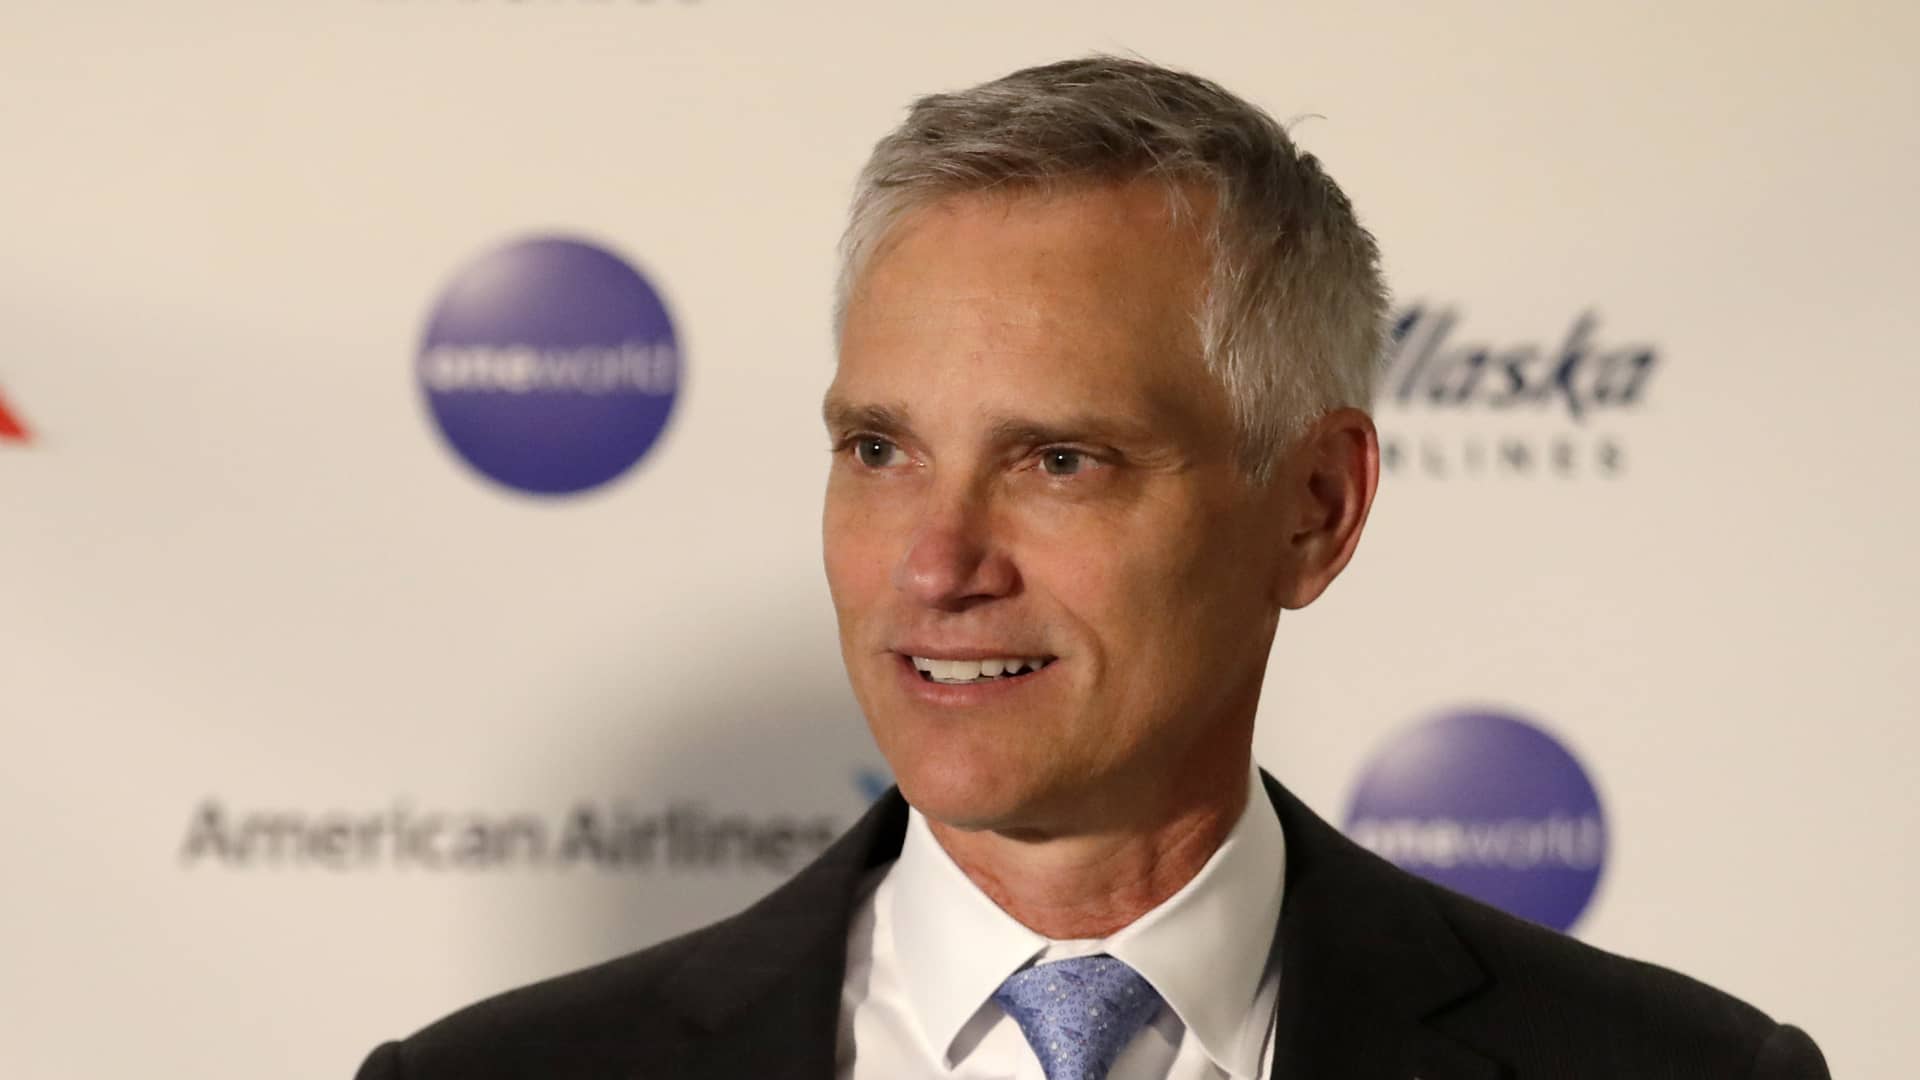 American Airlines CEO tells pilots the carrier will match Delta's pay